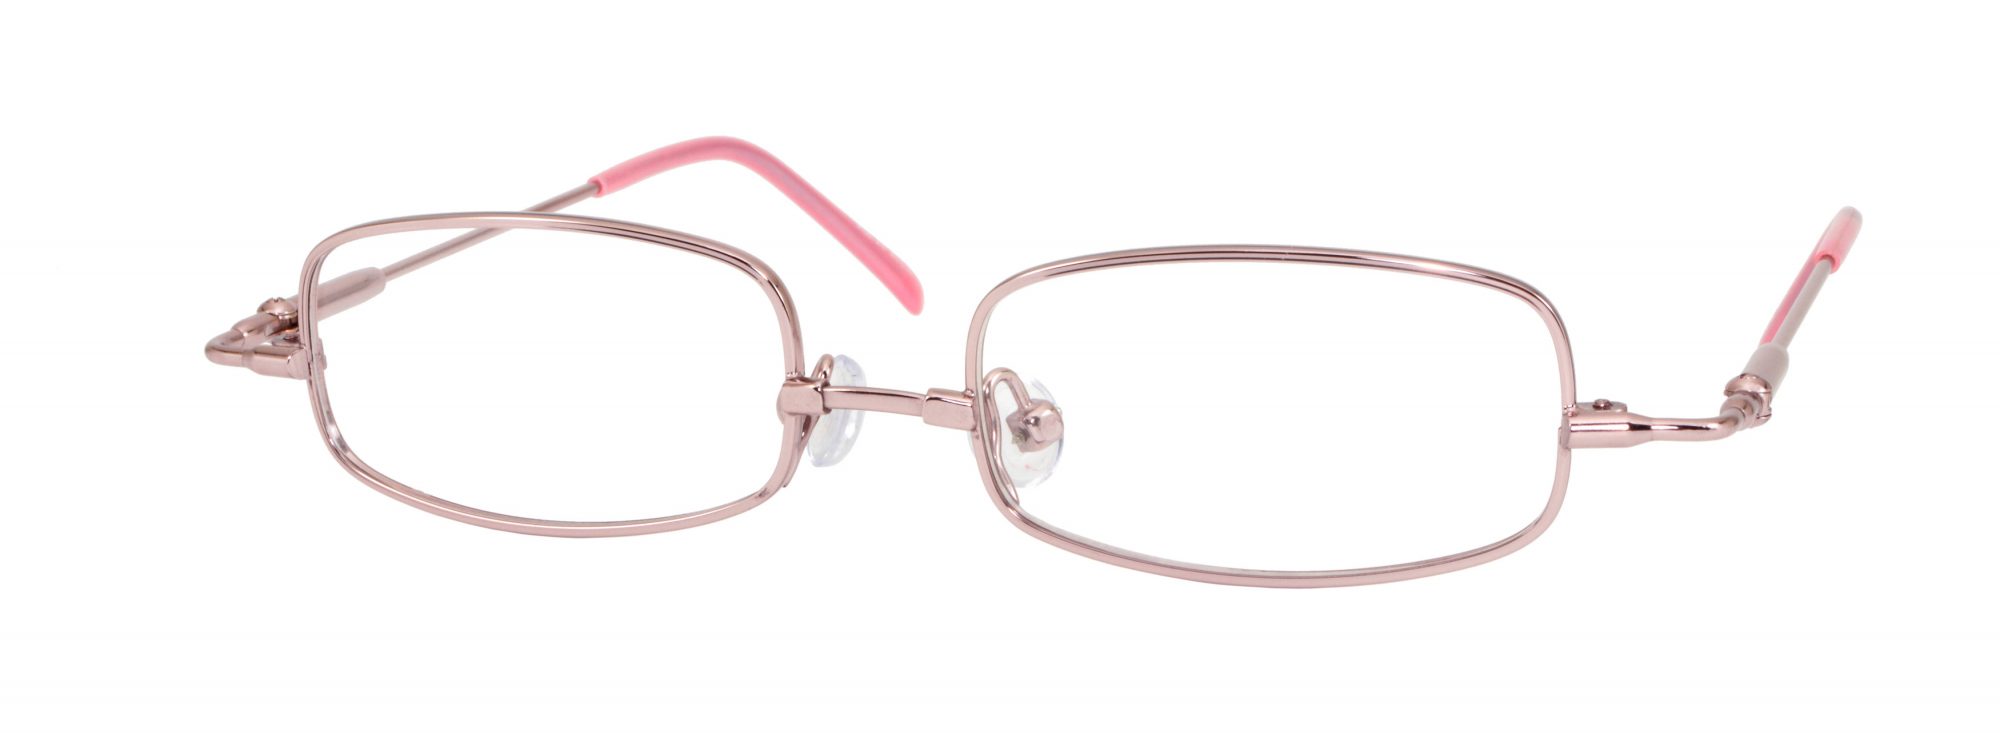 Erin's World frame style number EW-04 in pink